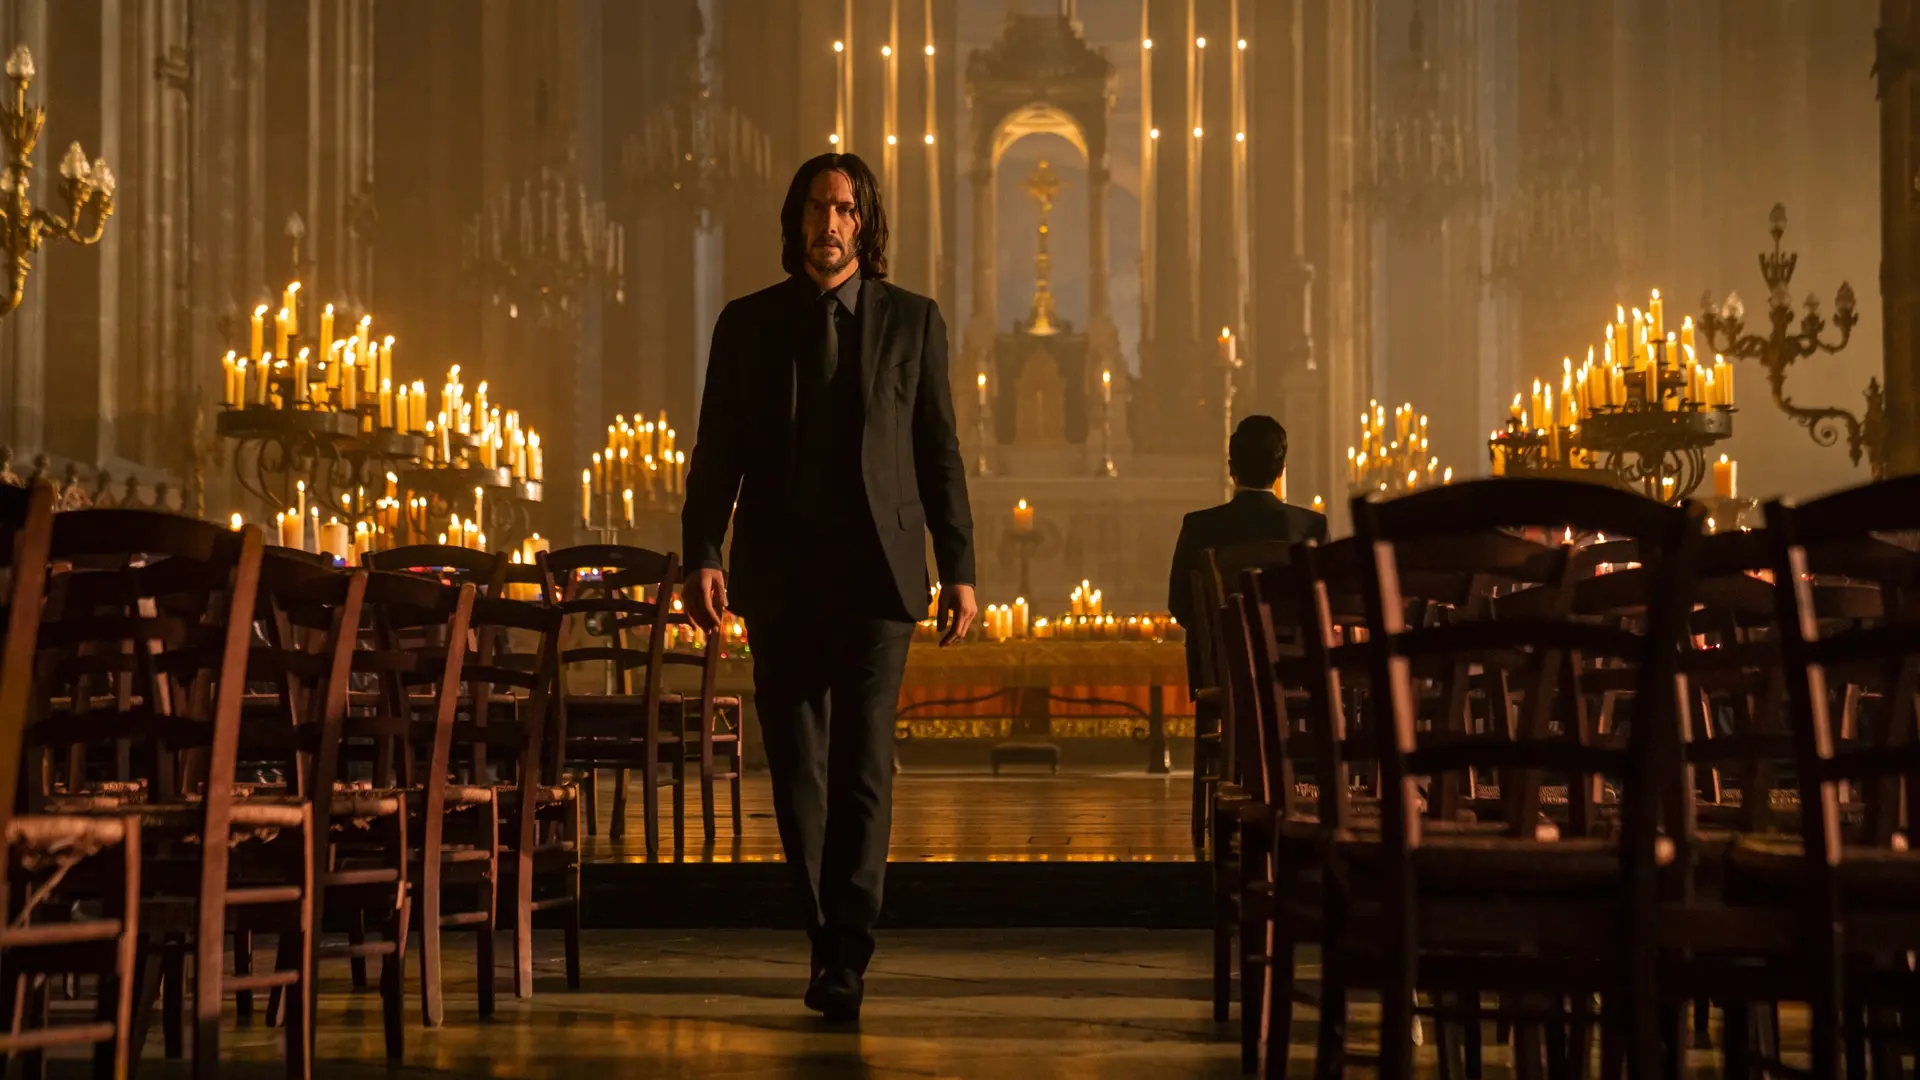 The New John Wick: Chapter 4 Trailer is Out With Insane Action and an Adorable Sidekick Dog